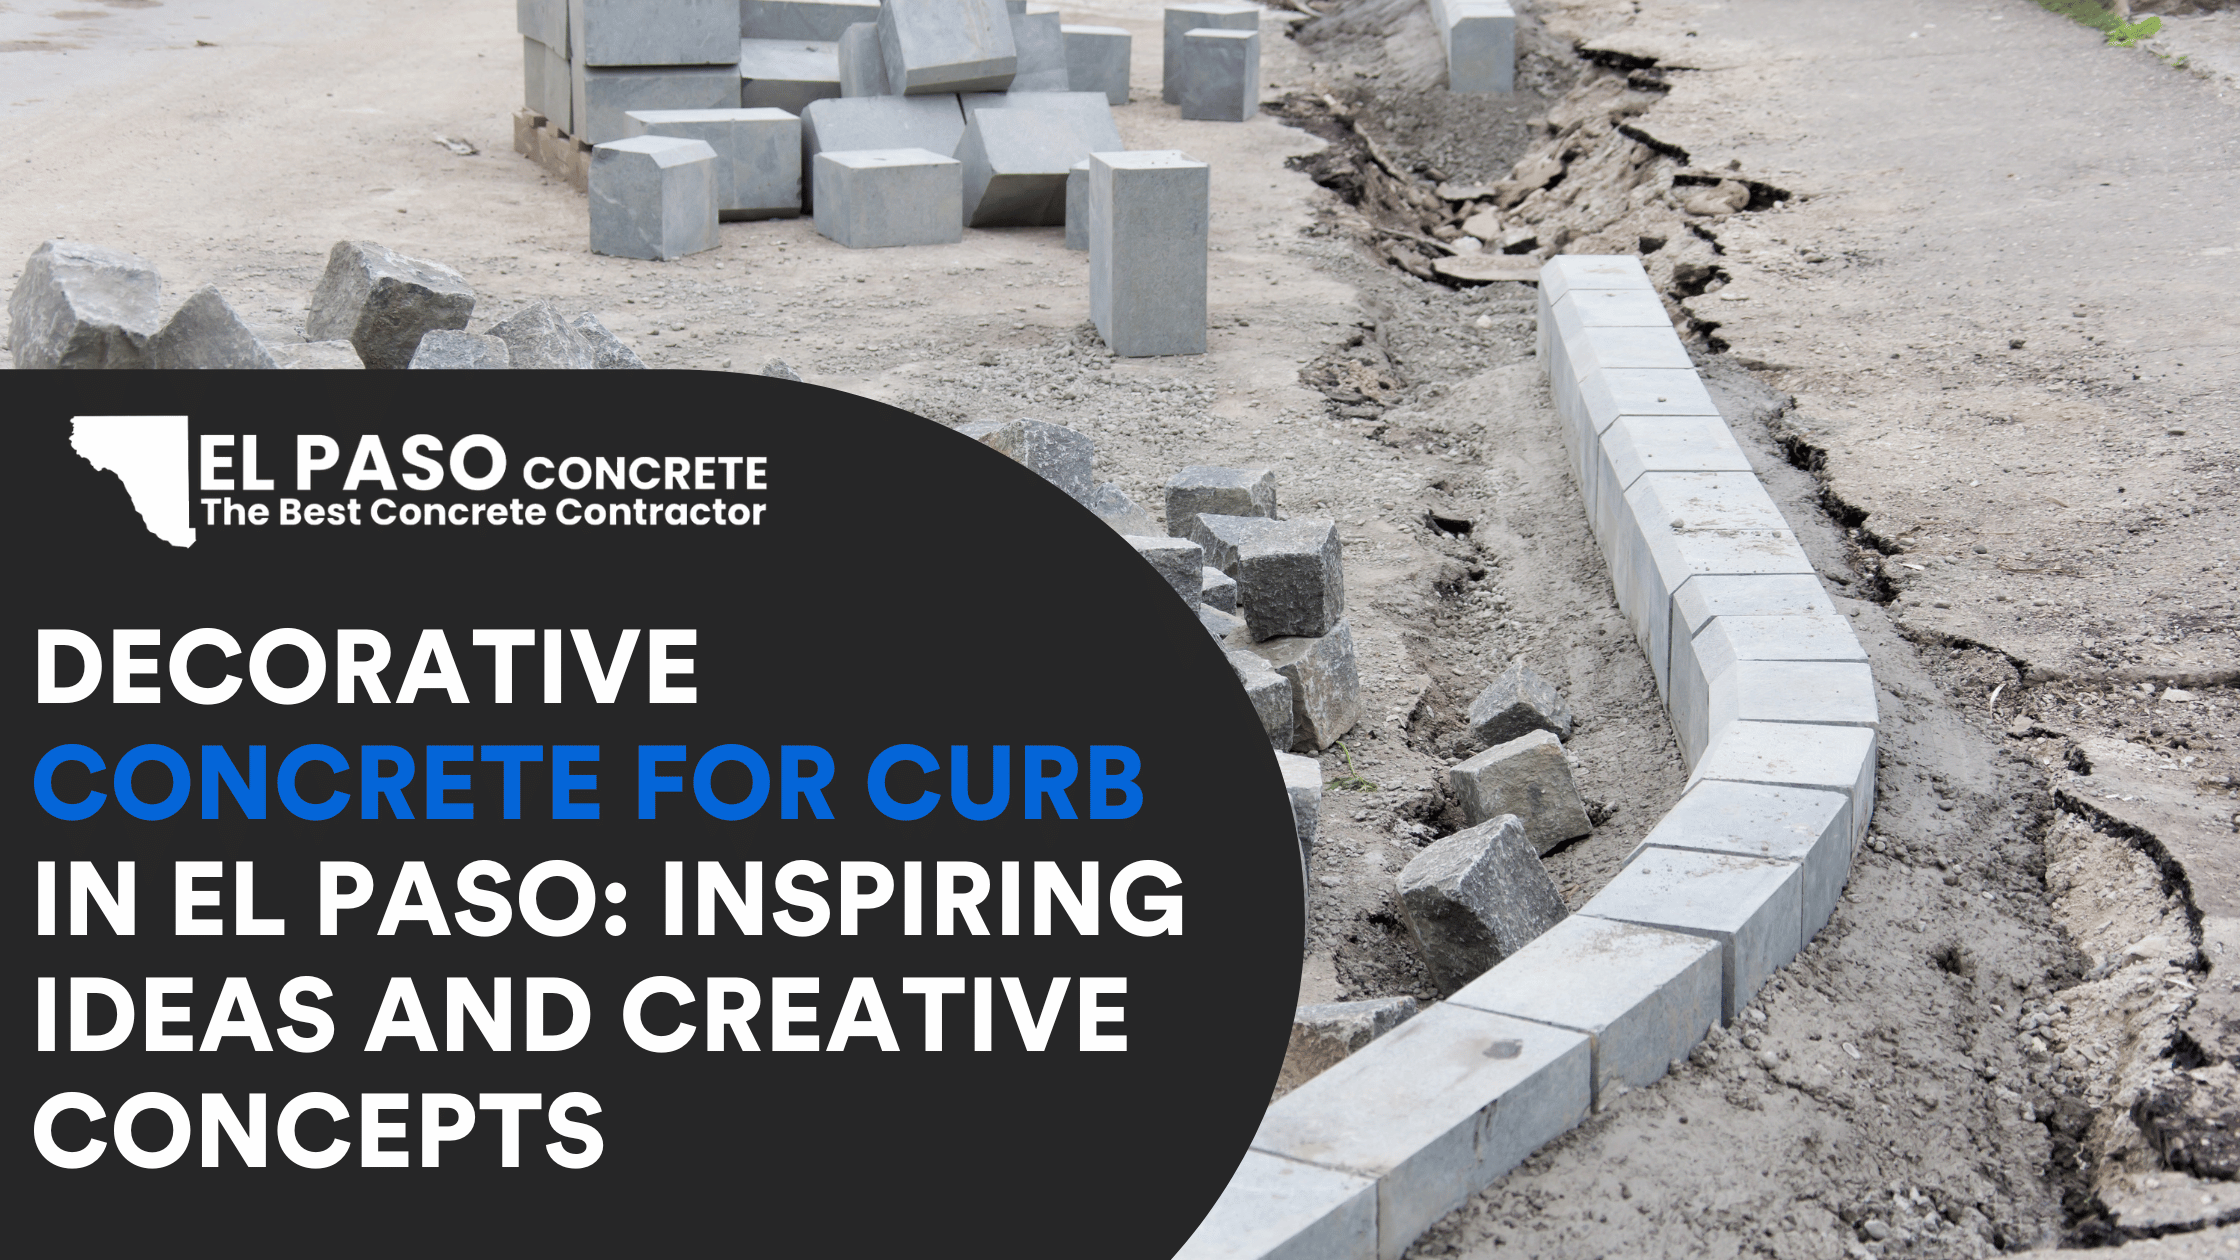 Decorative Concrete for Curb in El Paso: Inspiring Ideas and Creative Concepts